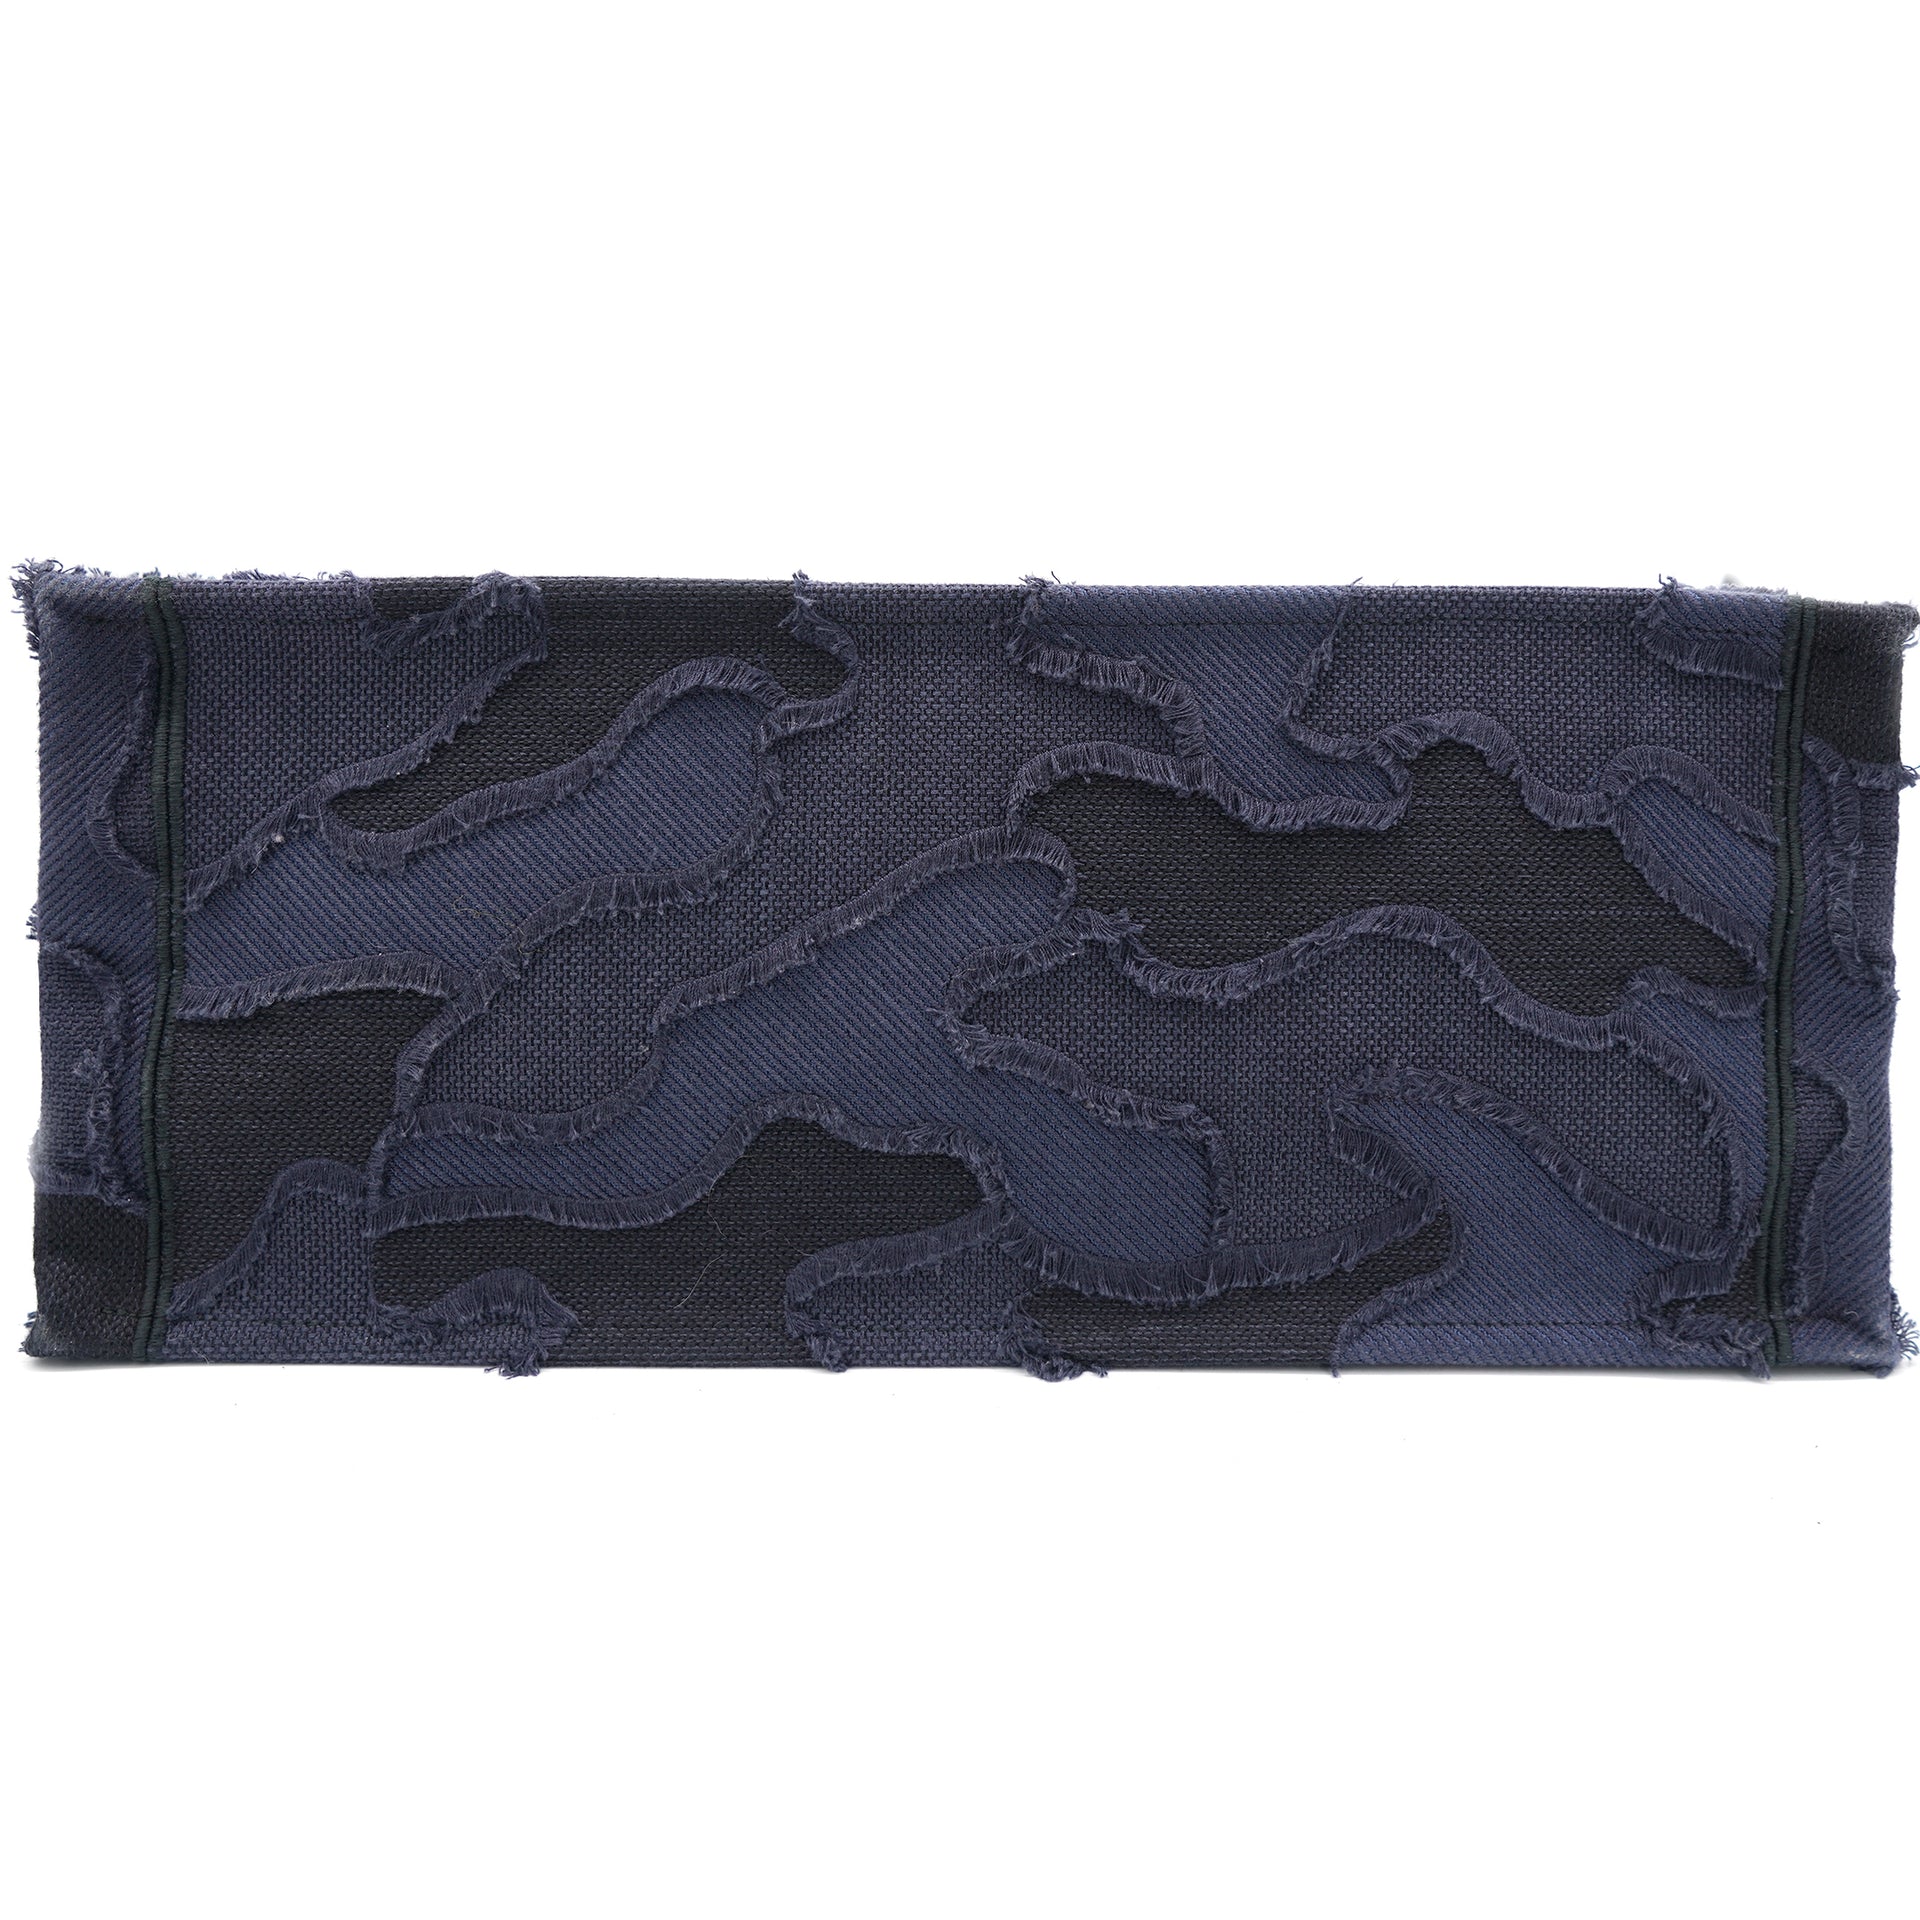 Camouflage Blue Large Book Tote